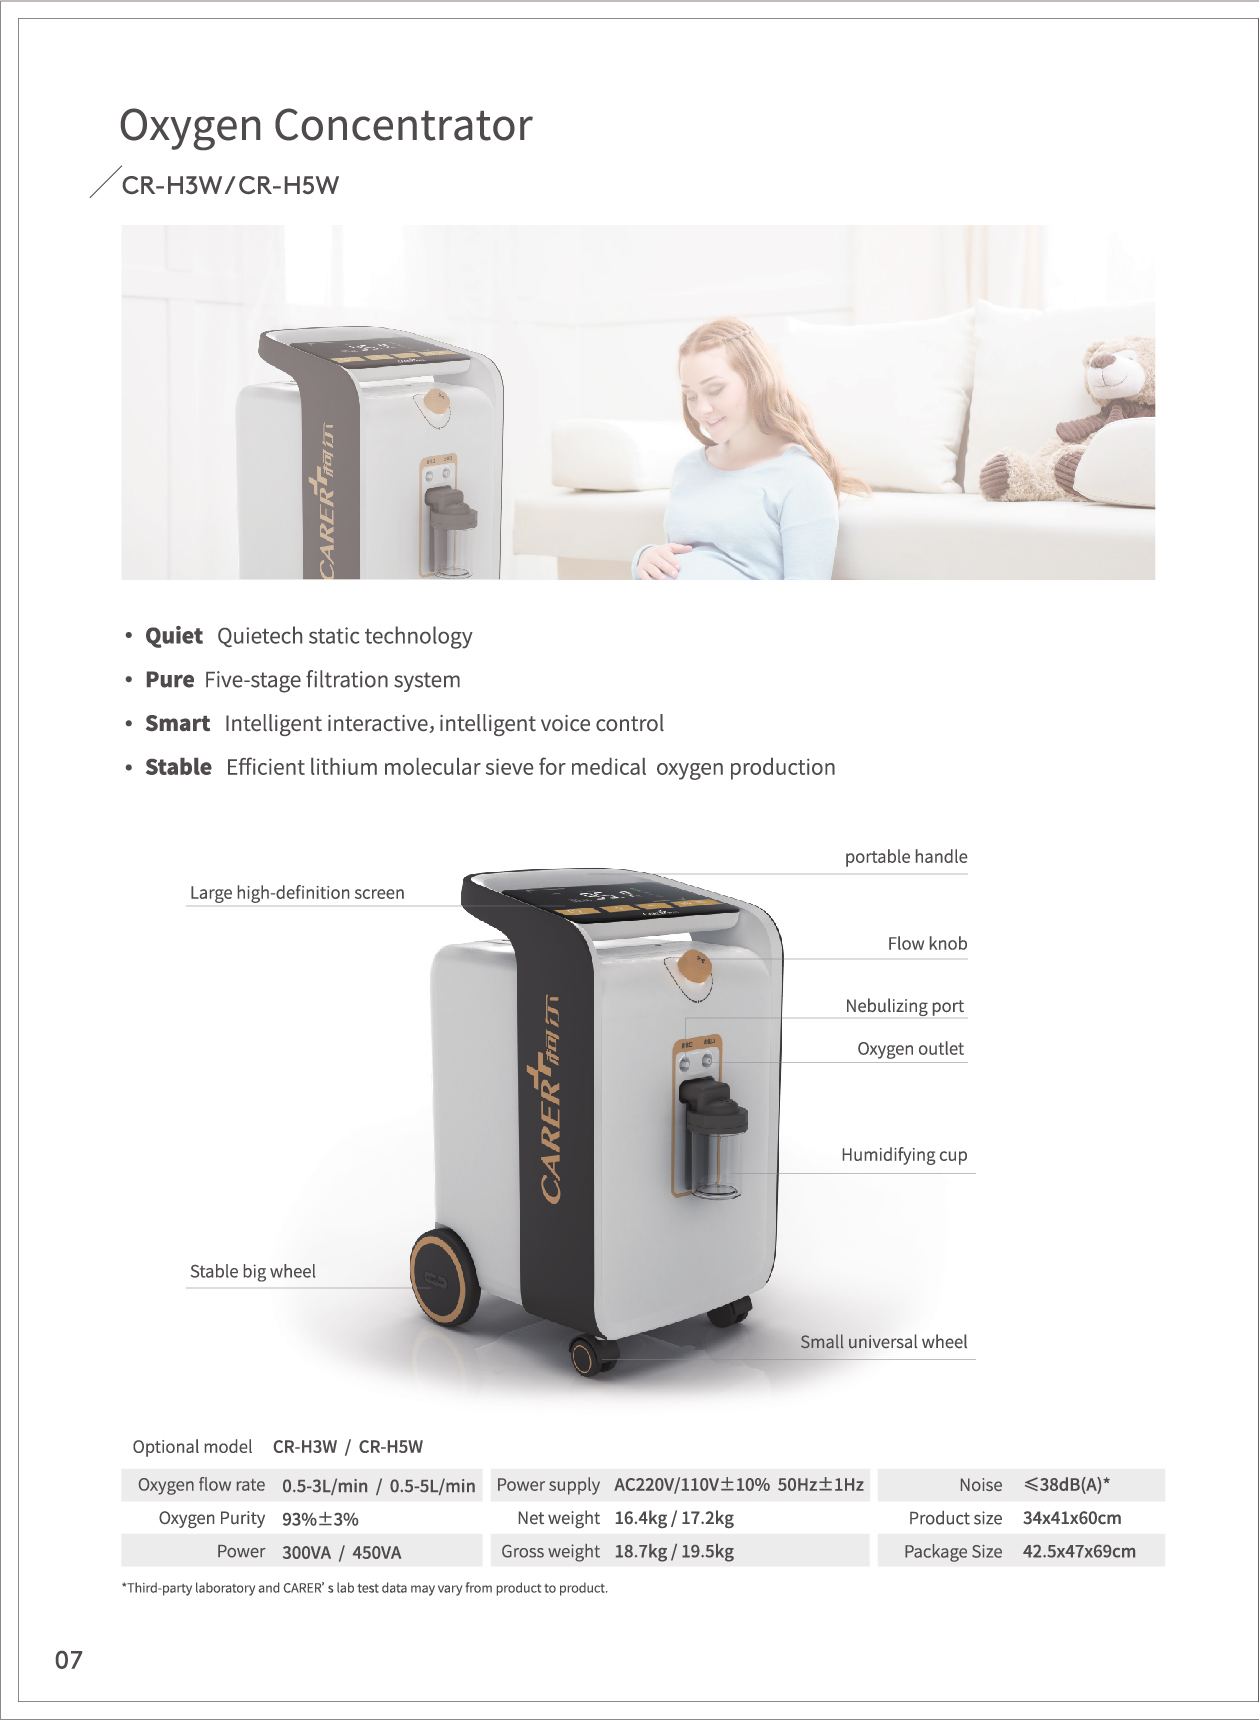 Catalog of silent oxygen concentrator